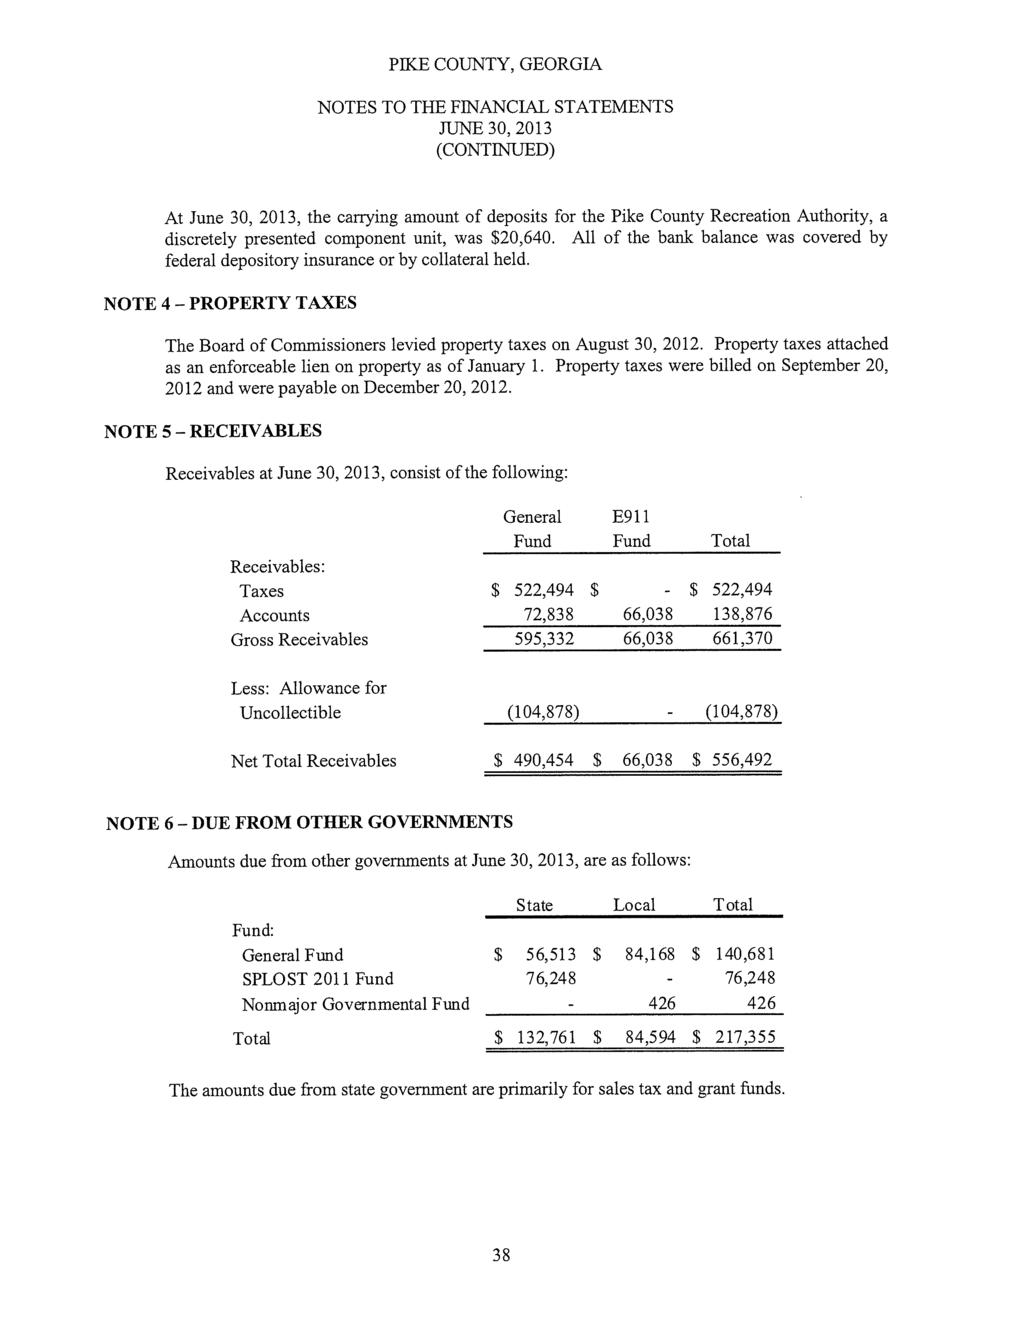 NOTES TO THE FINANCIAL STATEMENTS JIJNE 30, 2013 (CONTINUED) At June 30, 2013, the carrying amount of deposits for the Pike County Recreation Authority, a discretely presented component unit, was